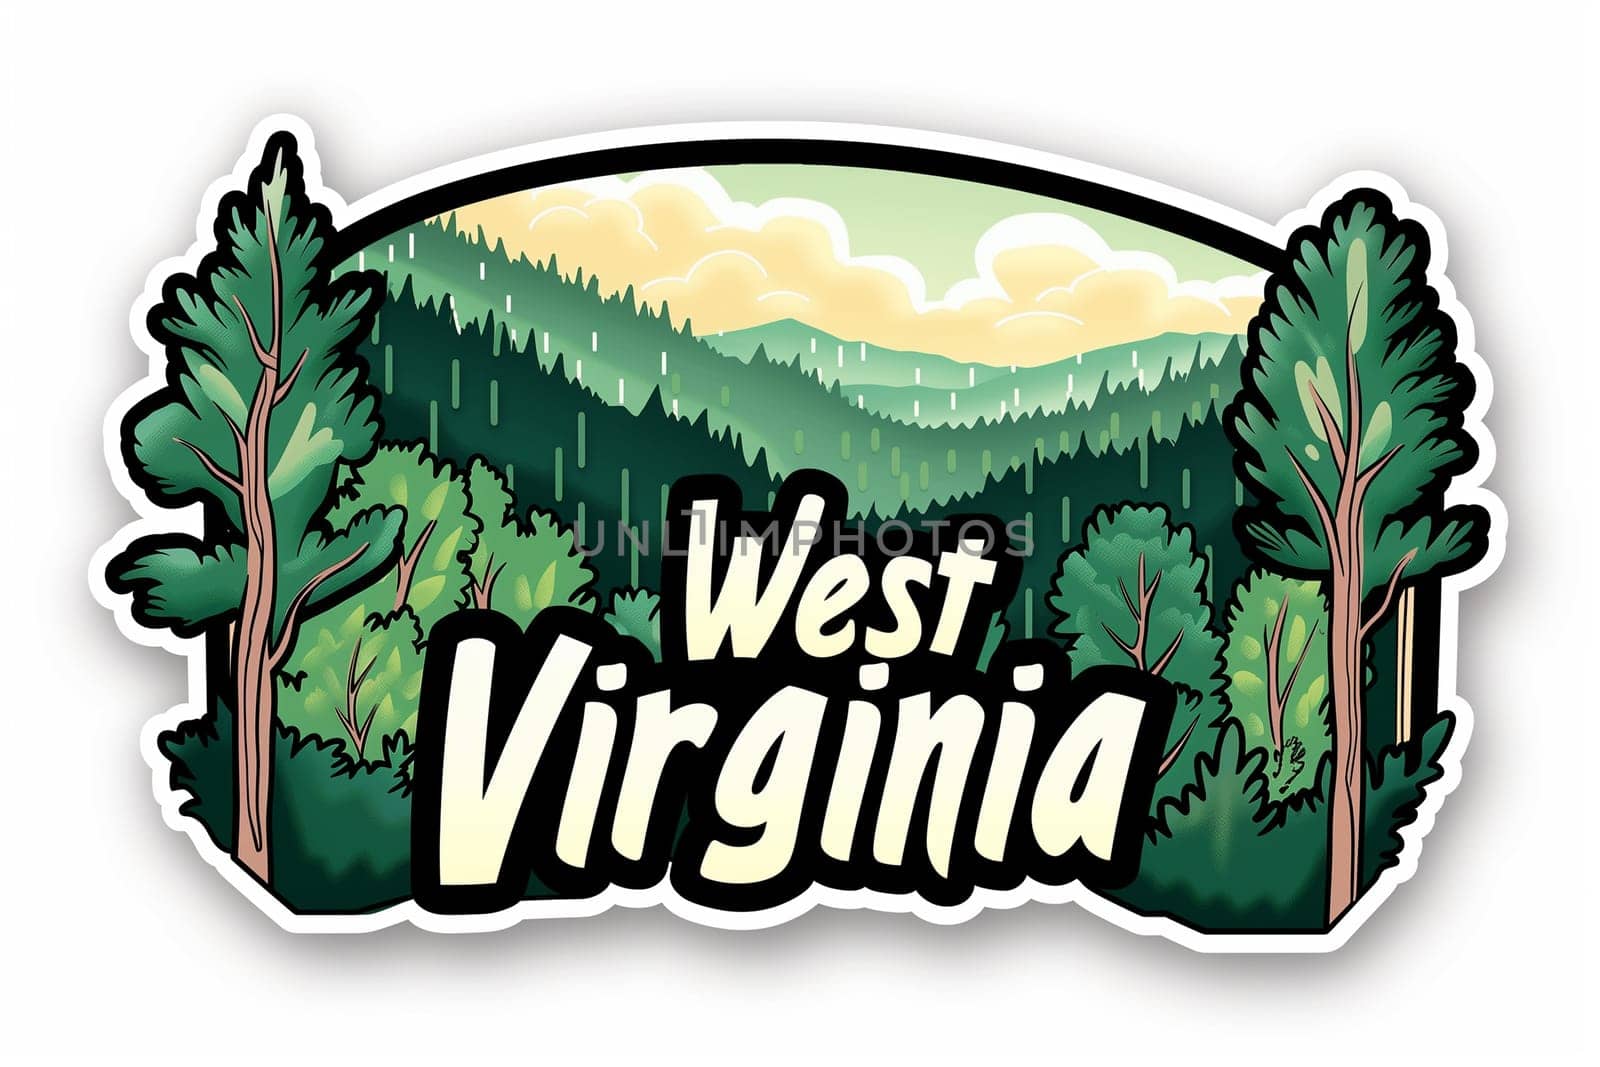 A sticker displaying the words West Virginia in bold lettering, ideal for showing pride or support for the state.